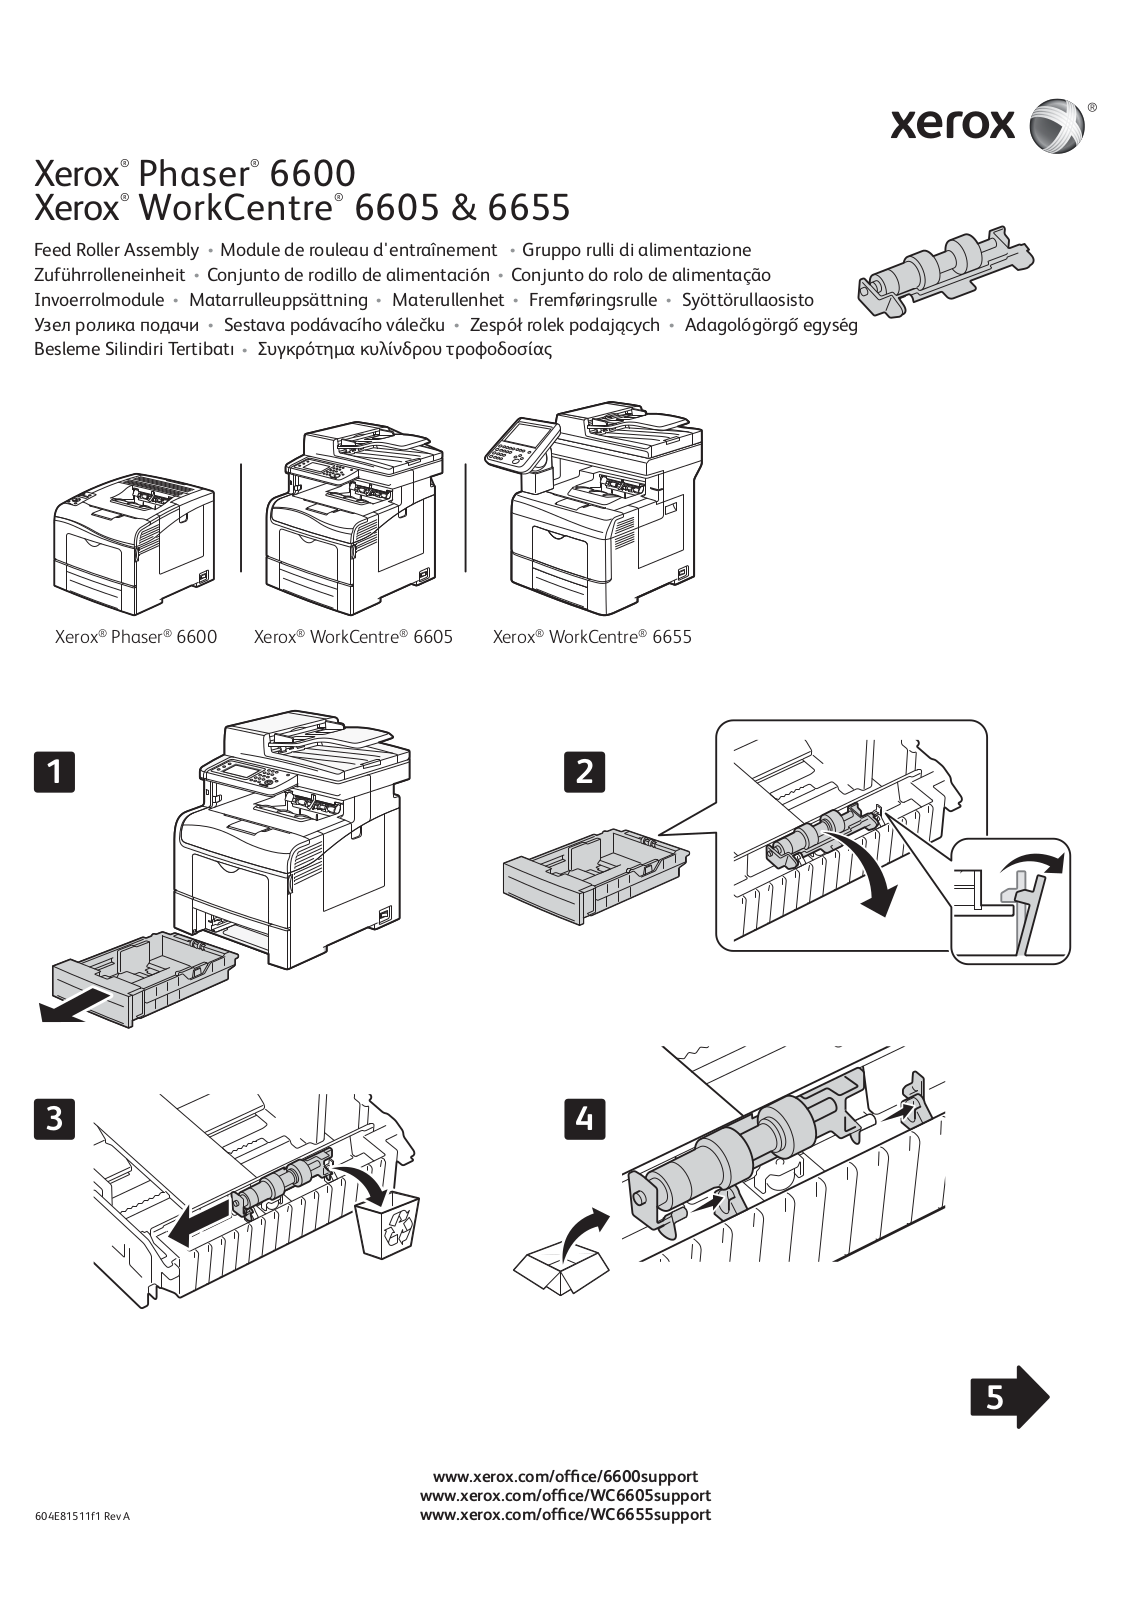 Xerox Feed Roller Assembly User manual